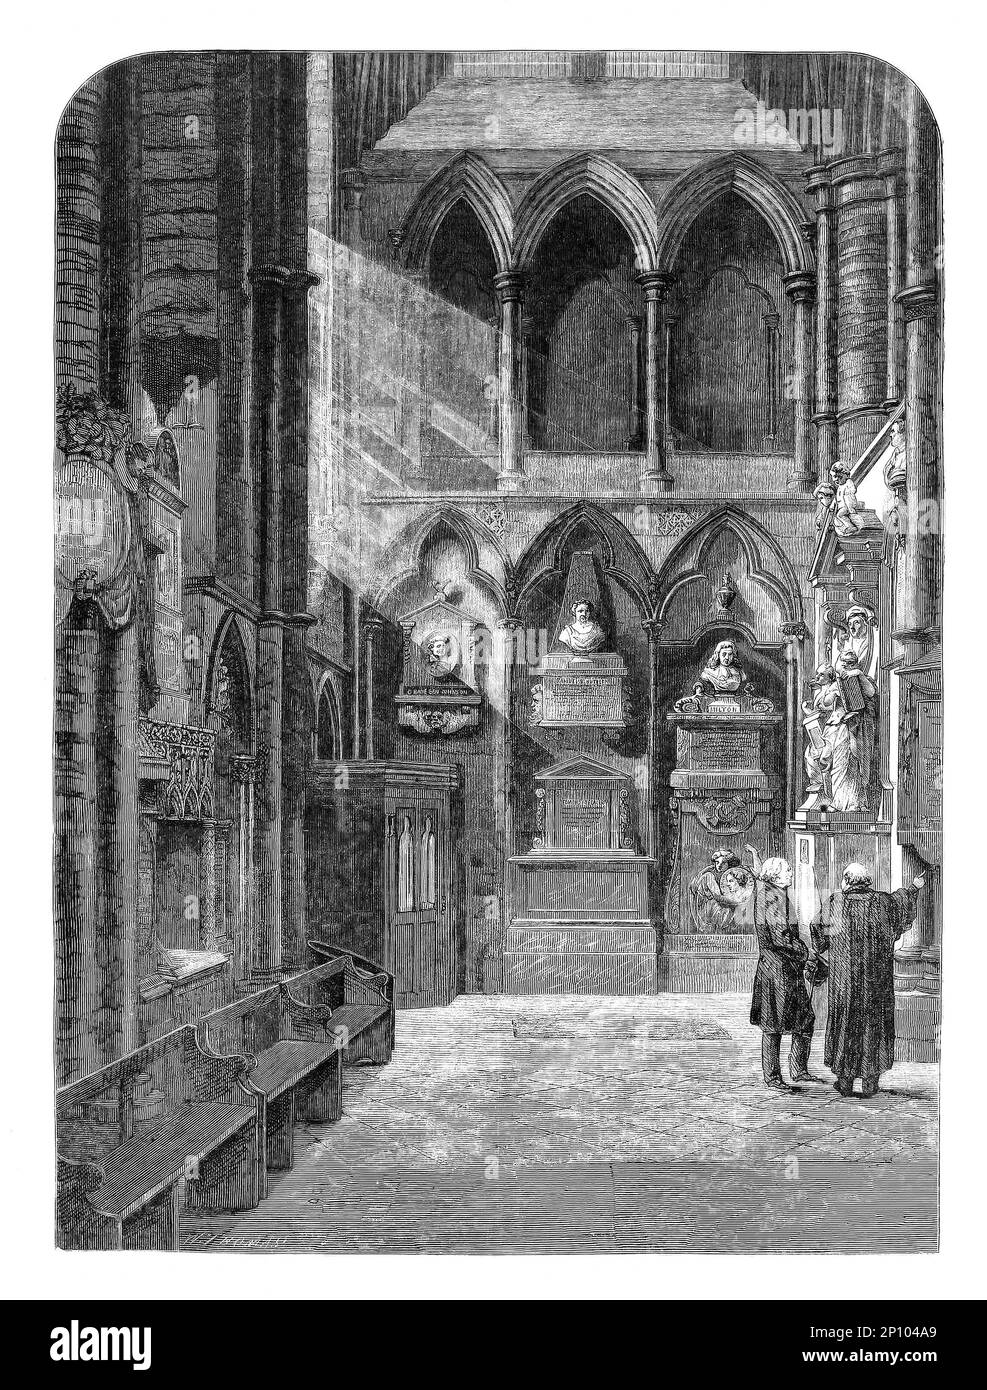 A drawing from 1860 of Poet's Corner and tombs in Westminster Abbey, London, England. Stock Photo